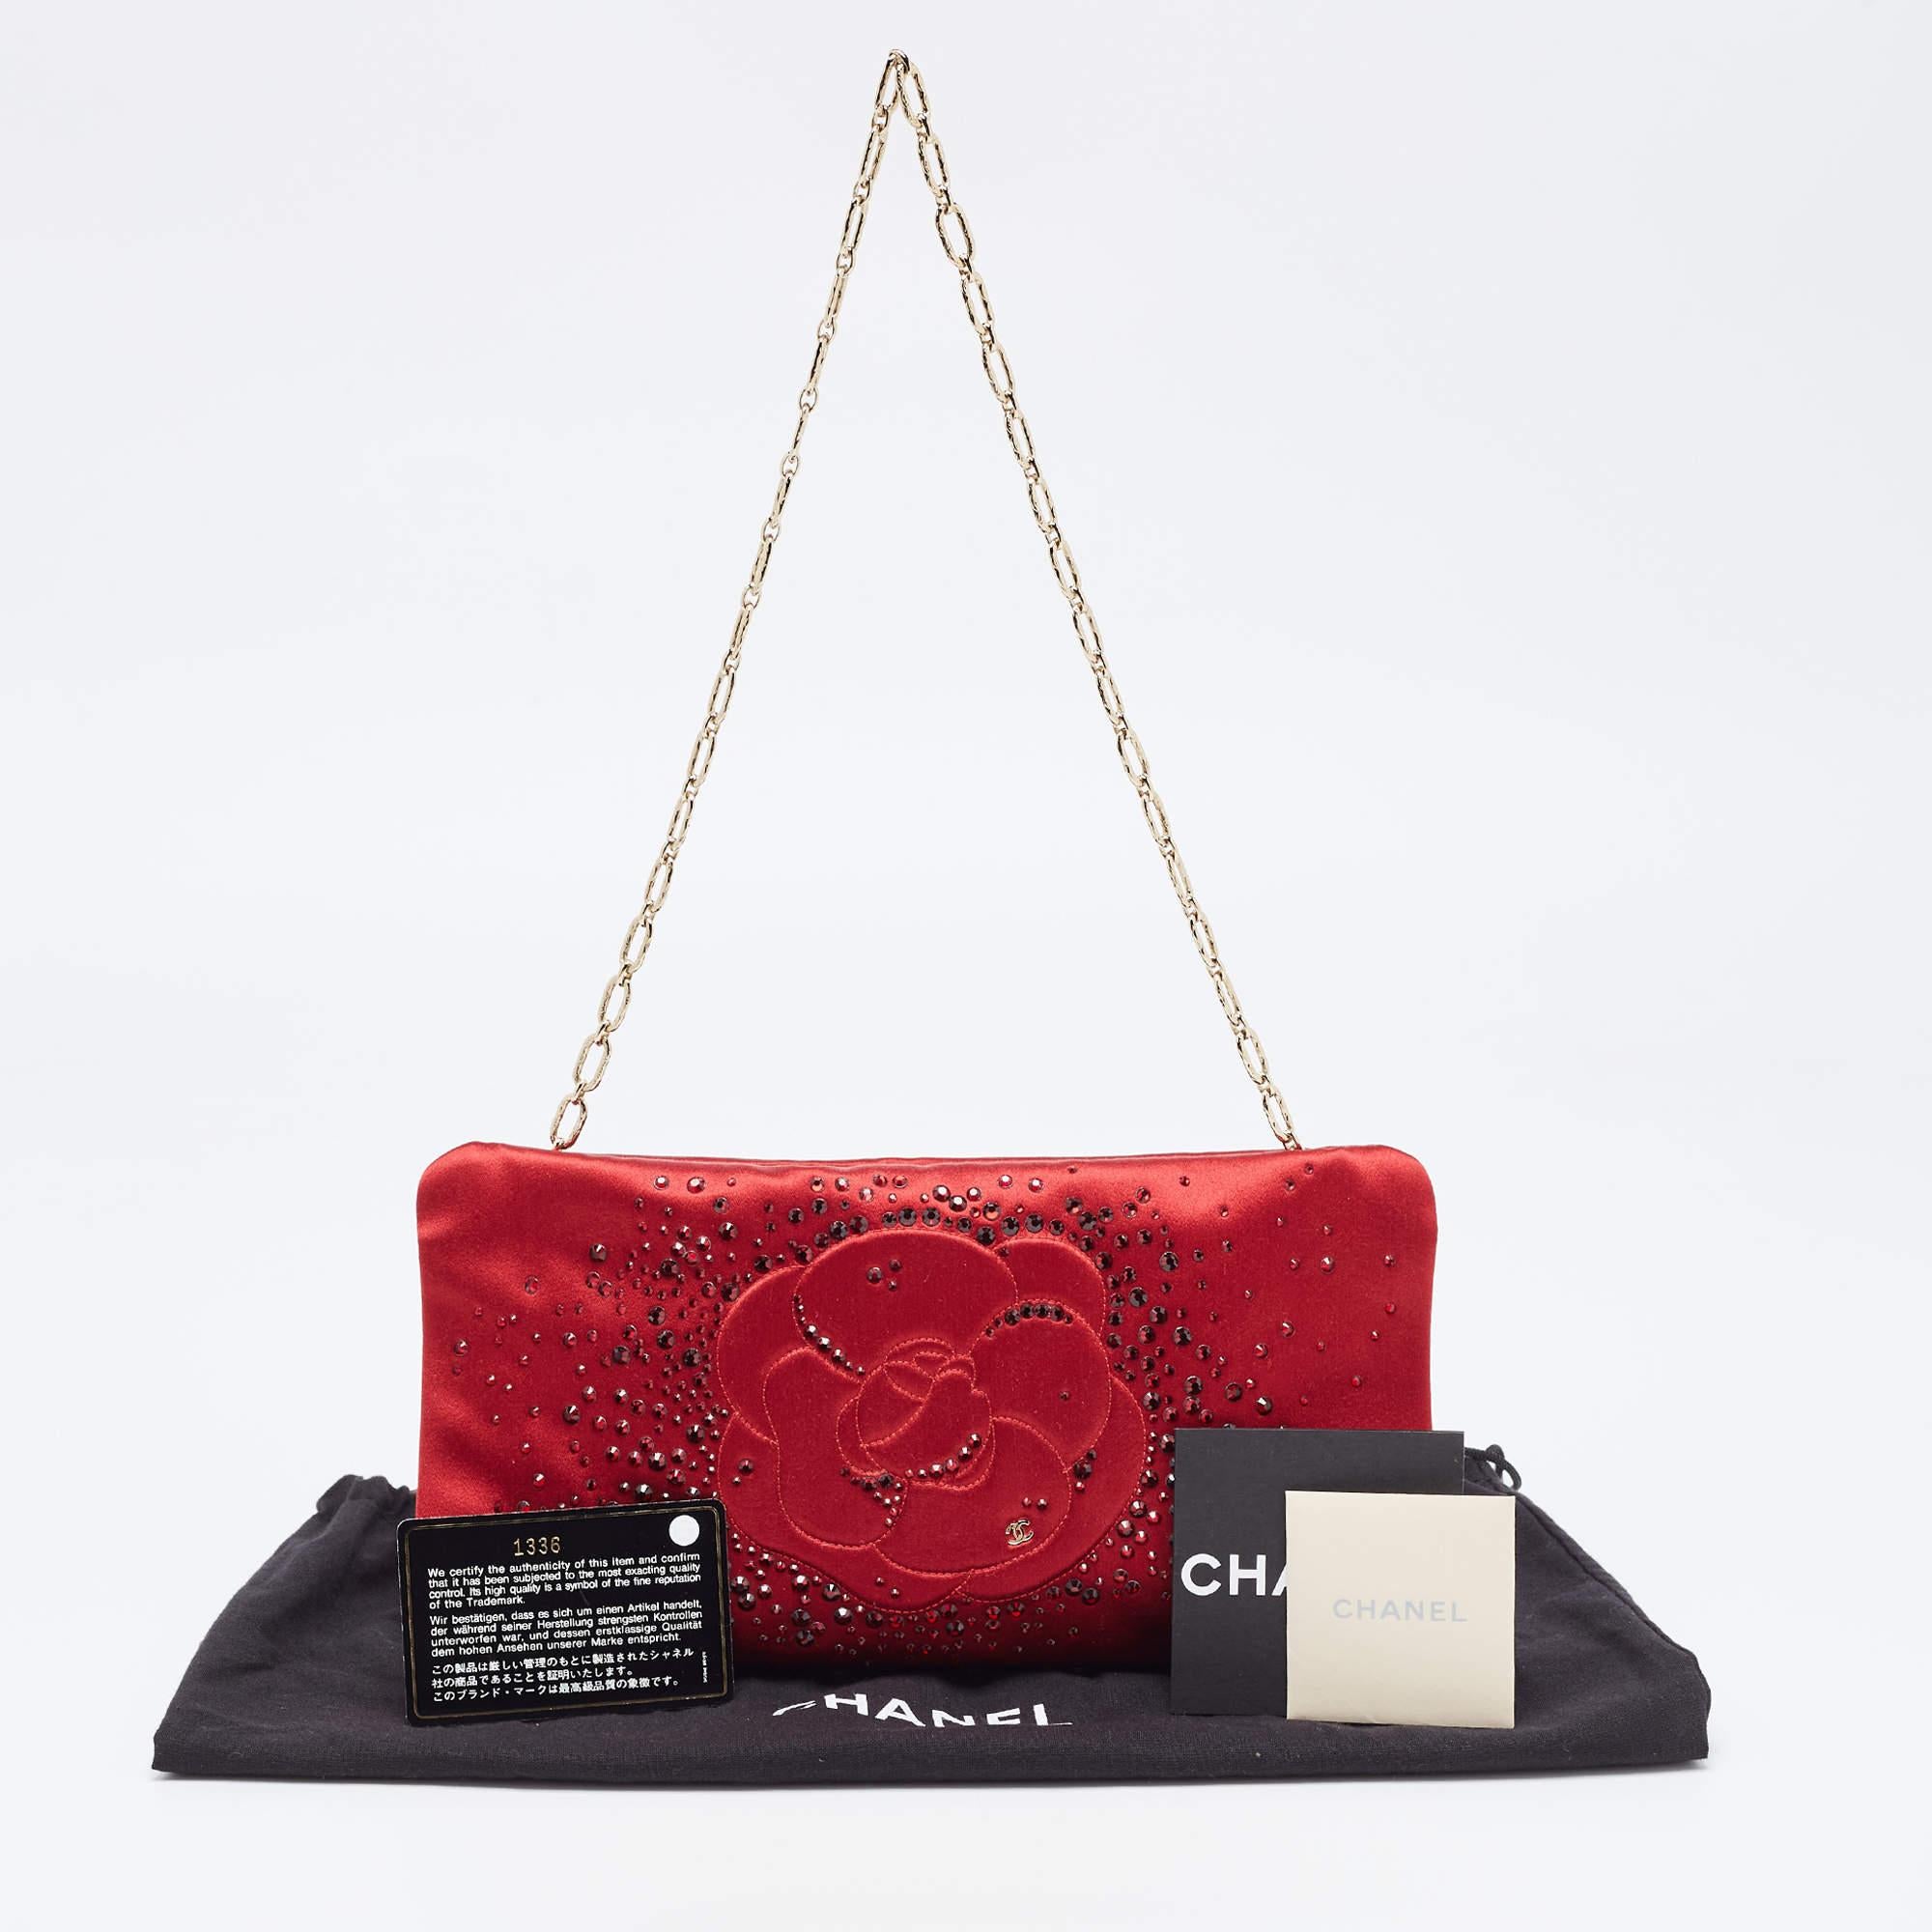 Chanel Red Satin Embellished Strass Camellia Chain Clutch 8